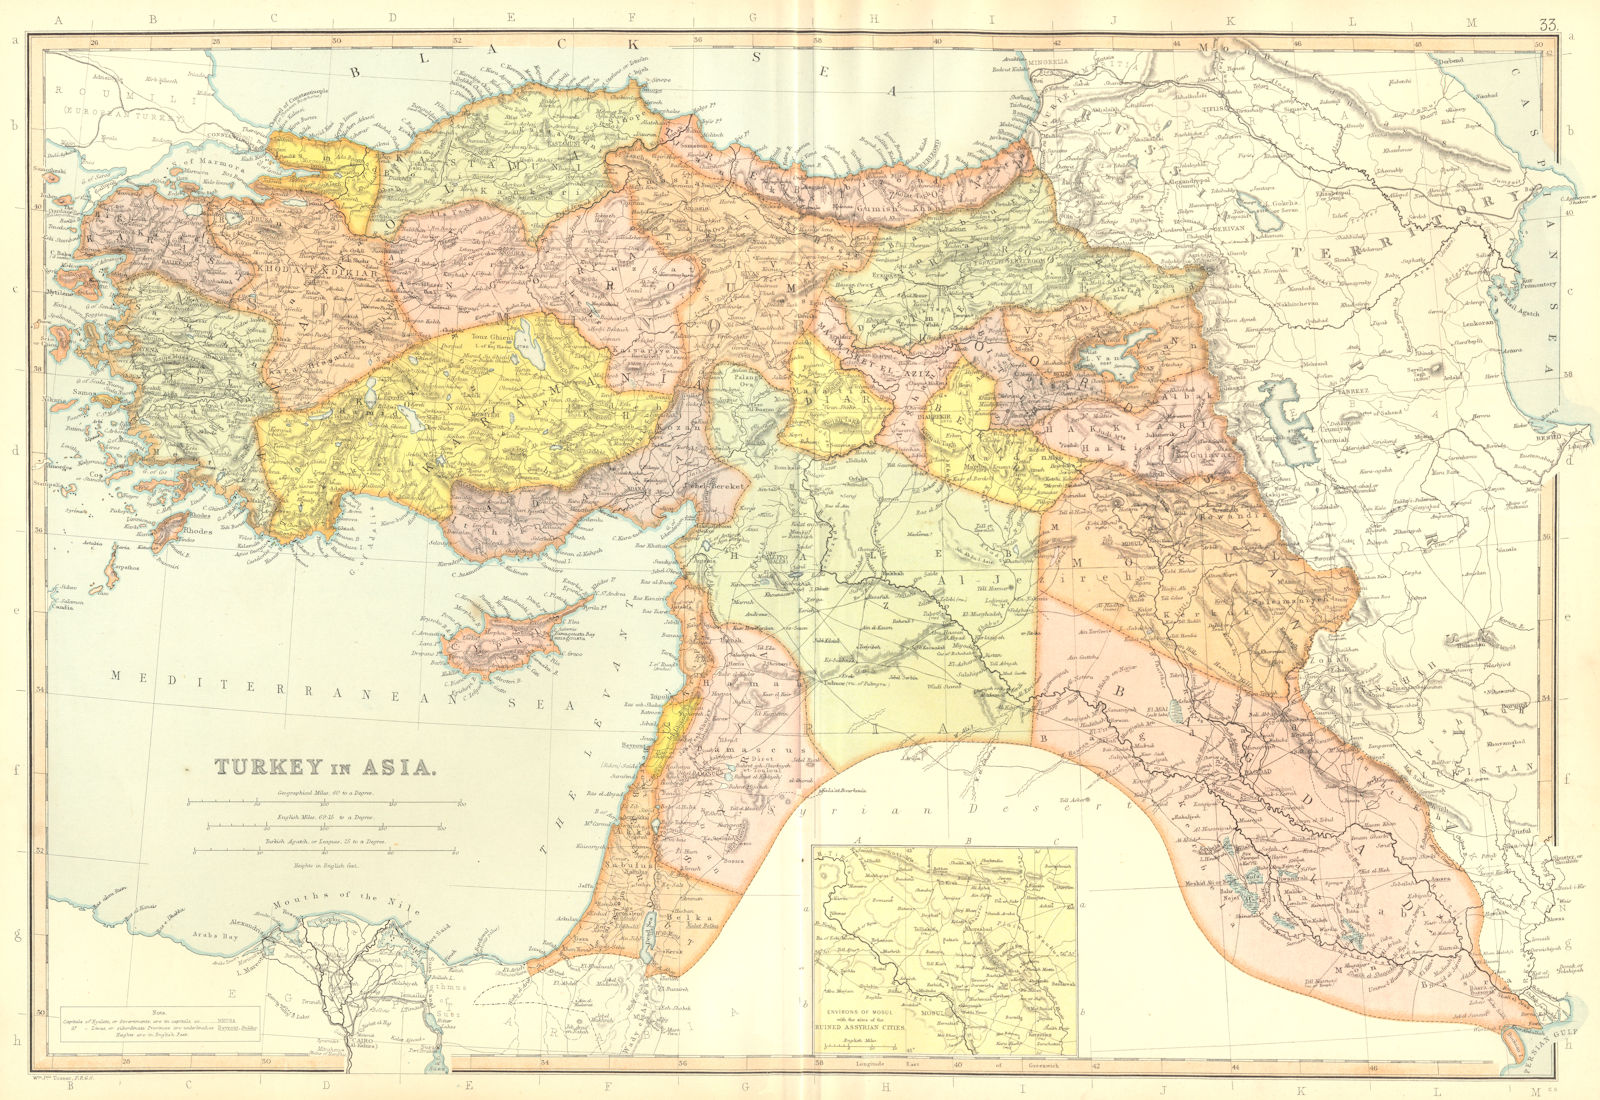 Associate Product TURKEY IN ASIA. Iraq Syria Palestine.Inset Mosul & Assyrian cities 1893 map